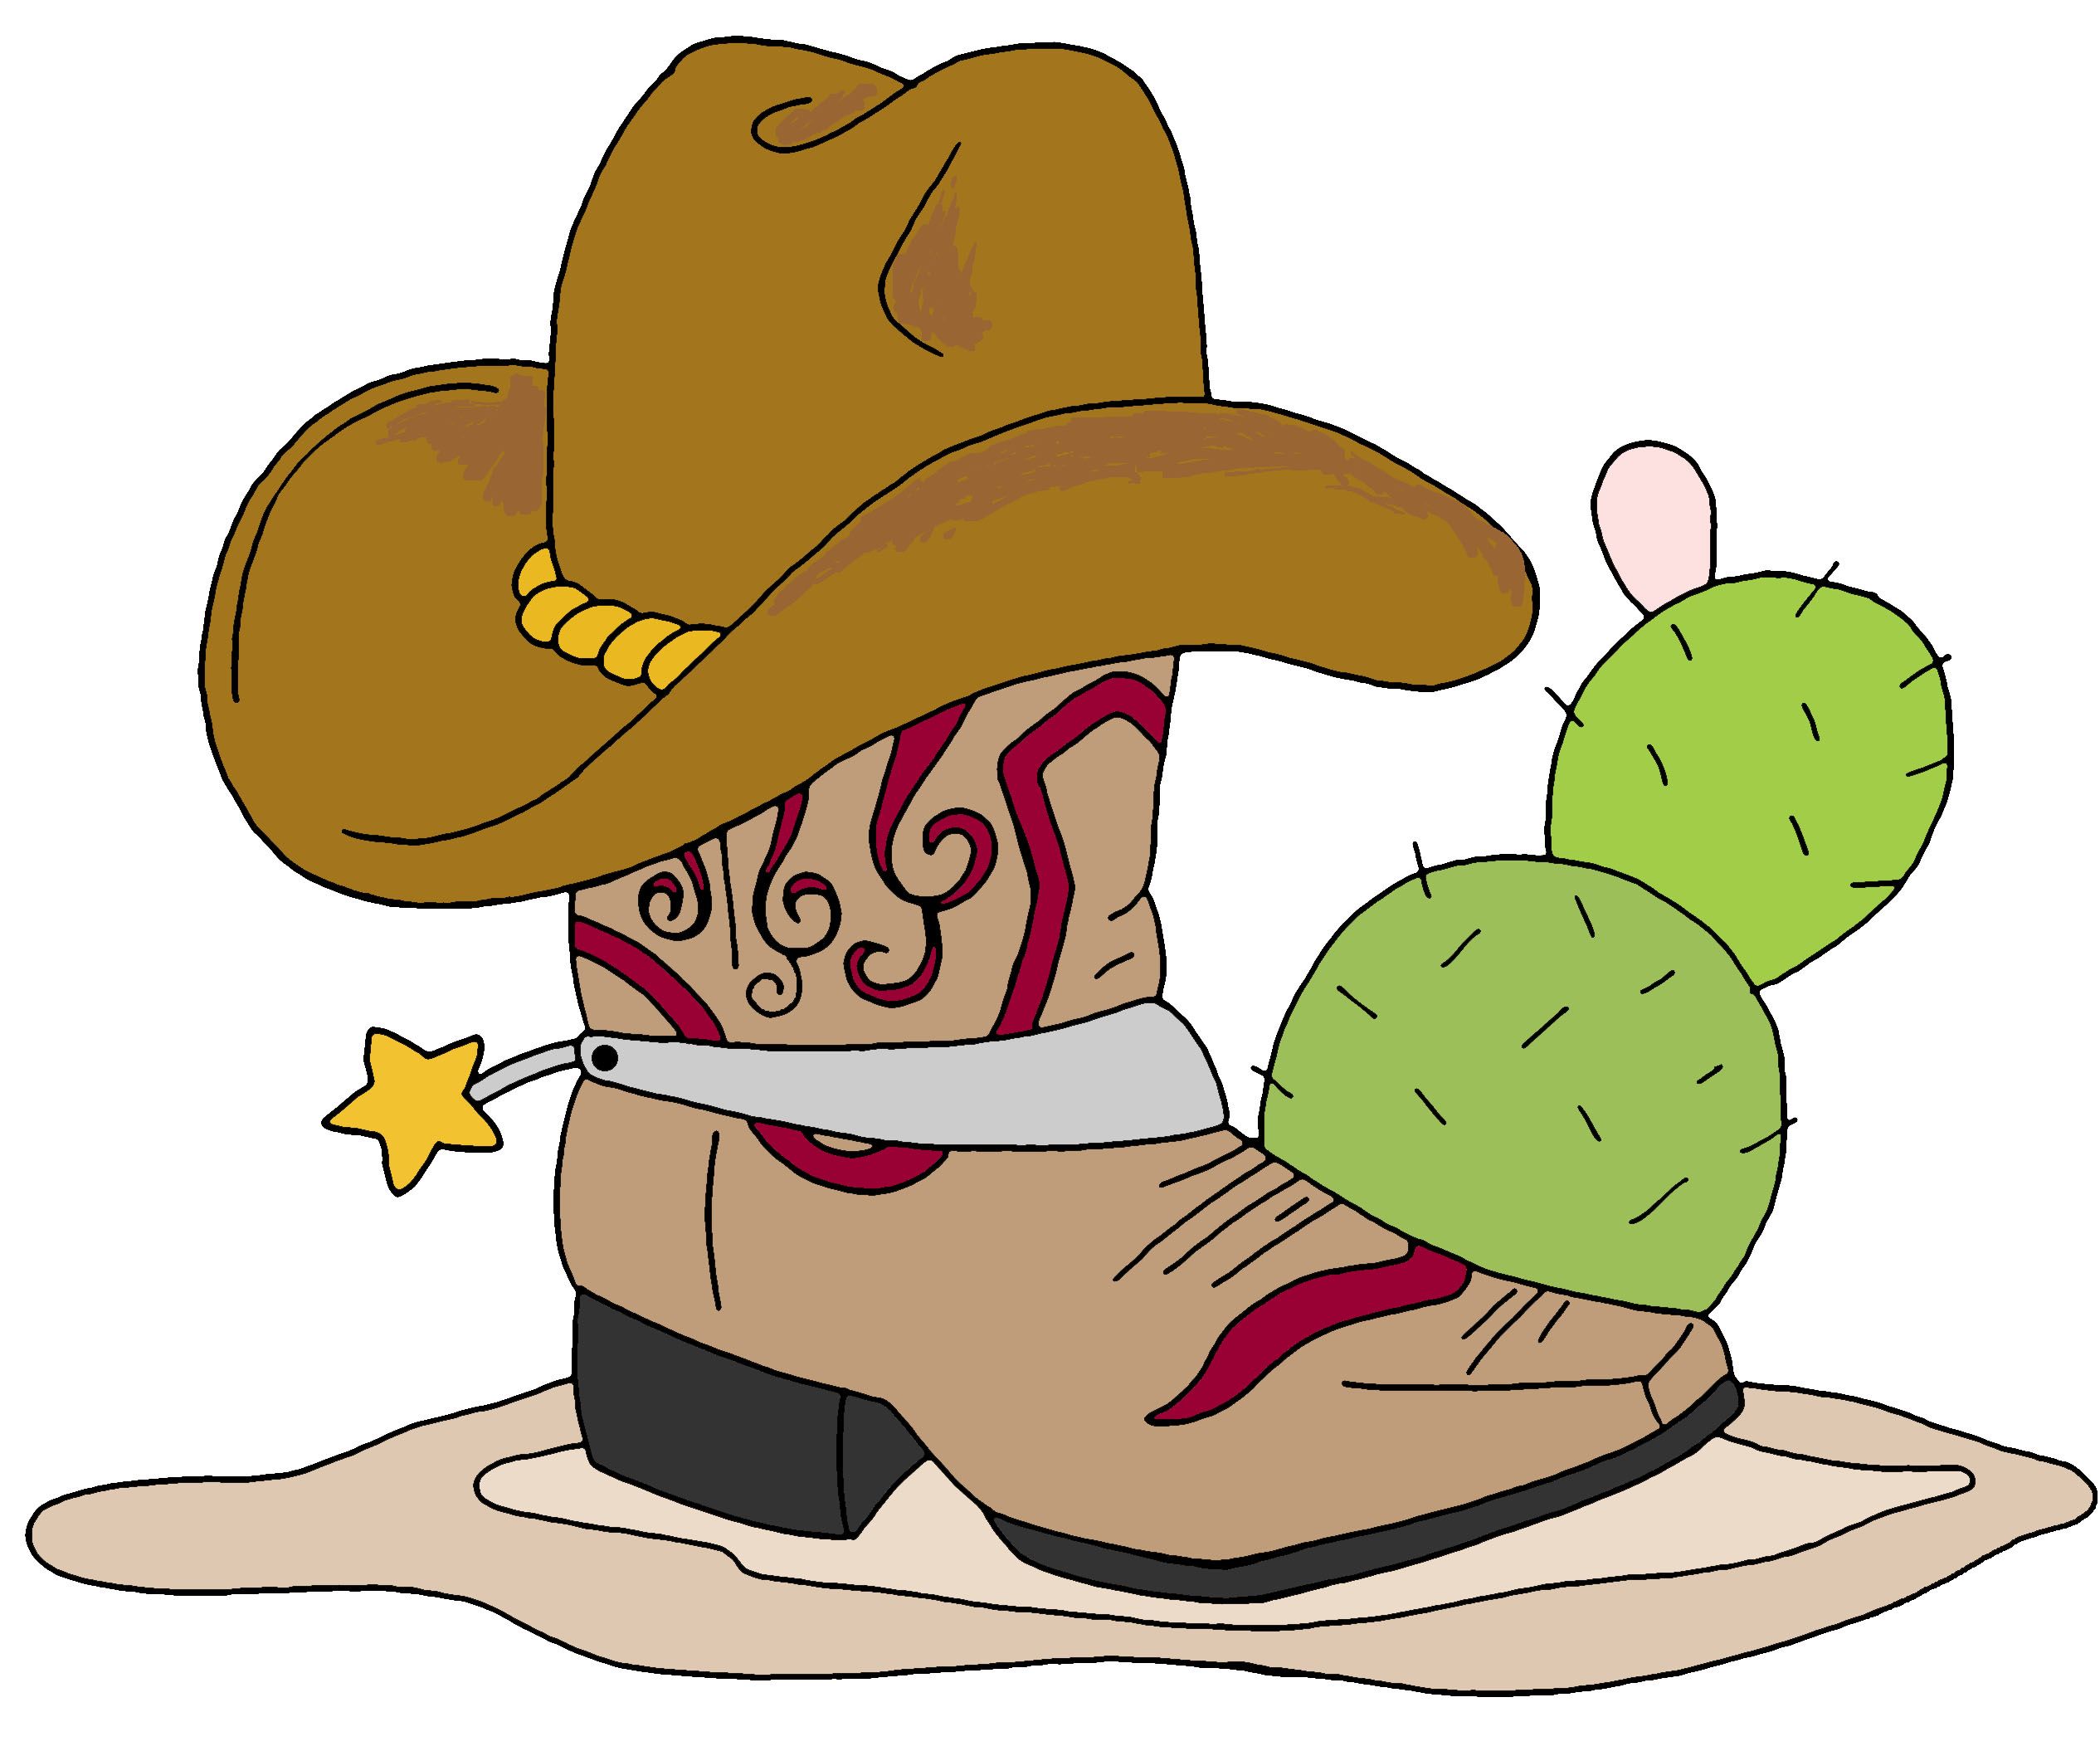 Cactus clipart cowboy. Pin by missy sartisticstitch